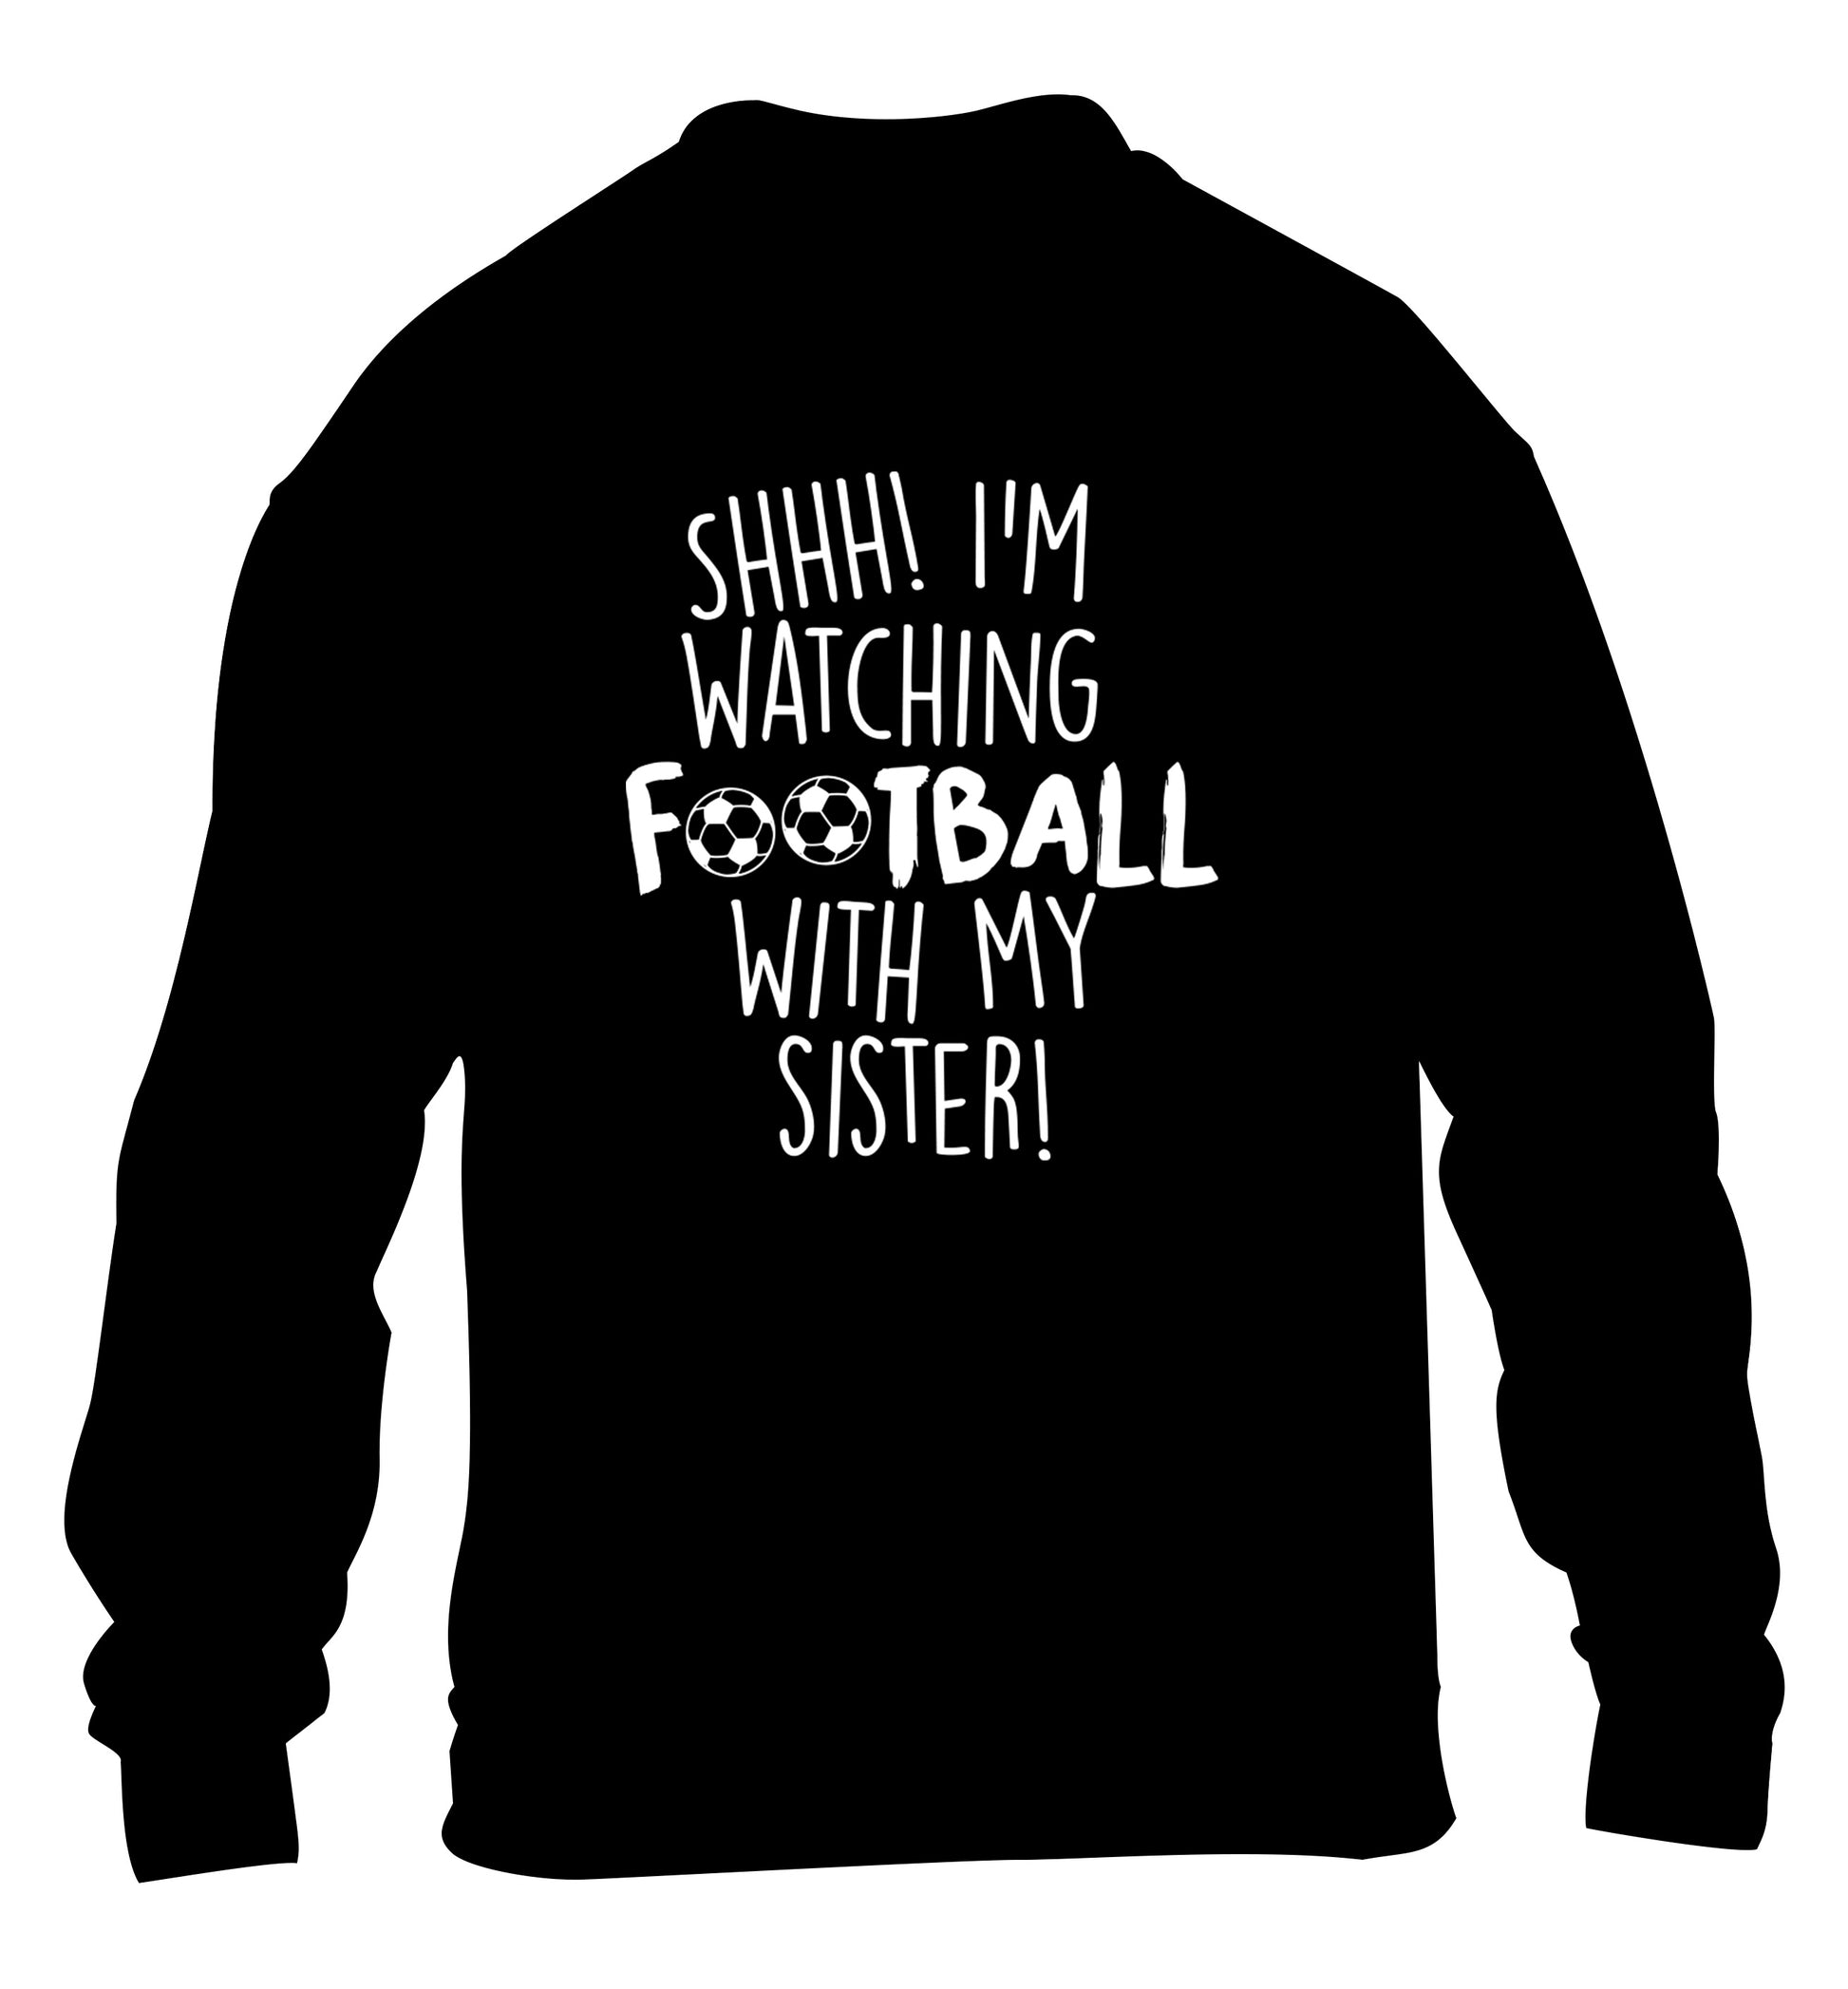 Shhh I'm watching football with my sister children's black sweater 12-14 Years